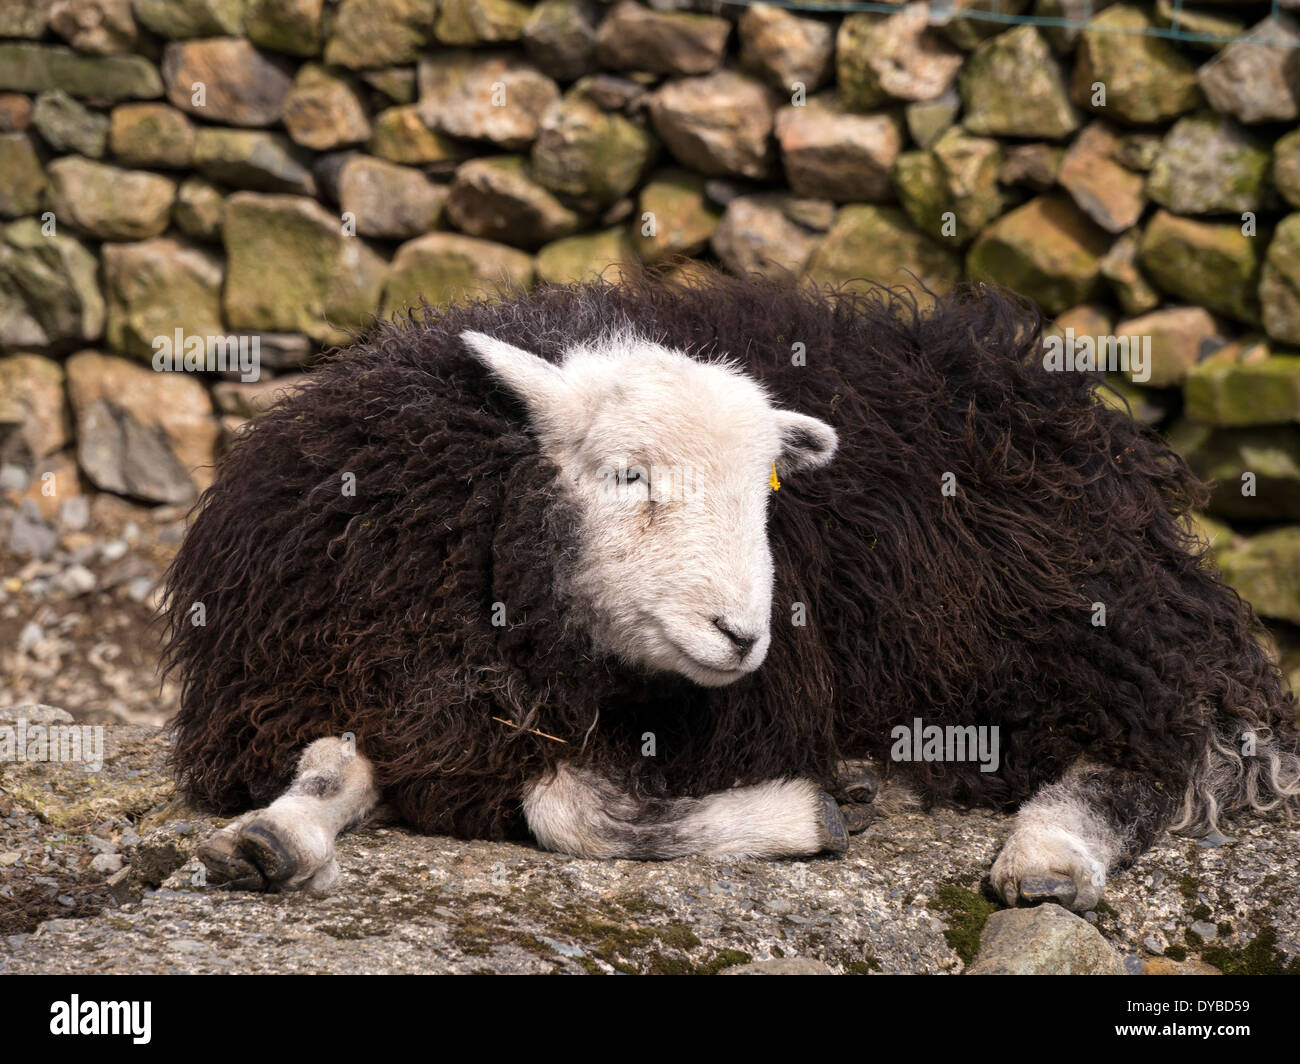 Black woolly Herdwick sheep with white face and legs lying by dry-stone wall, Lake District, Cumbria, England, UK Stock Photo